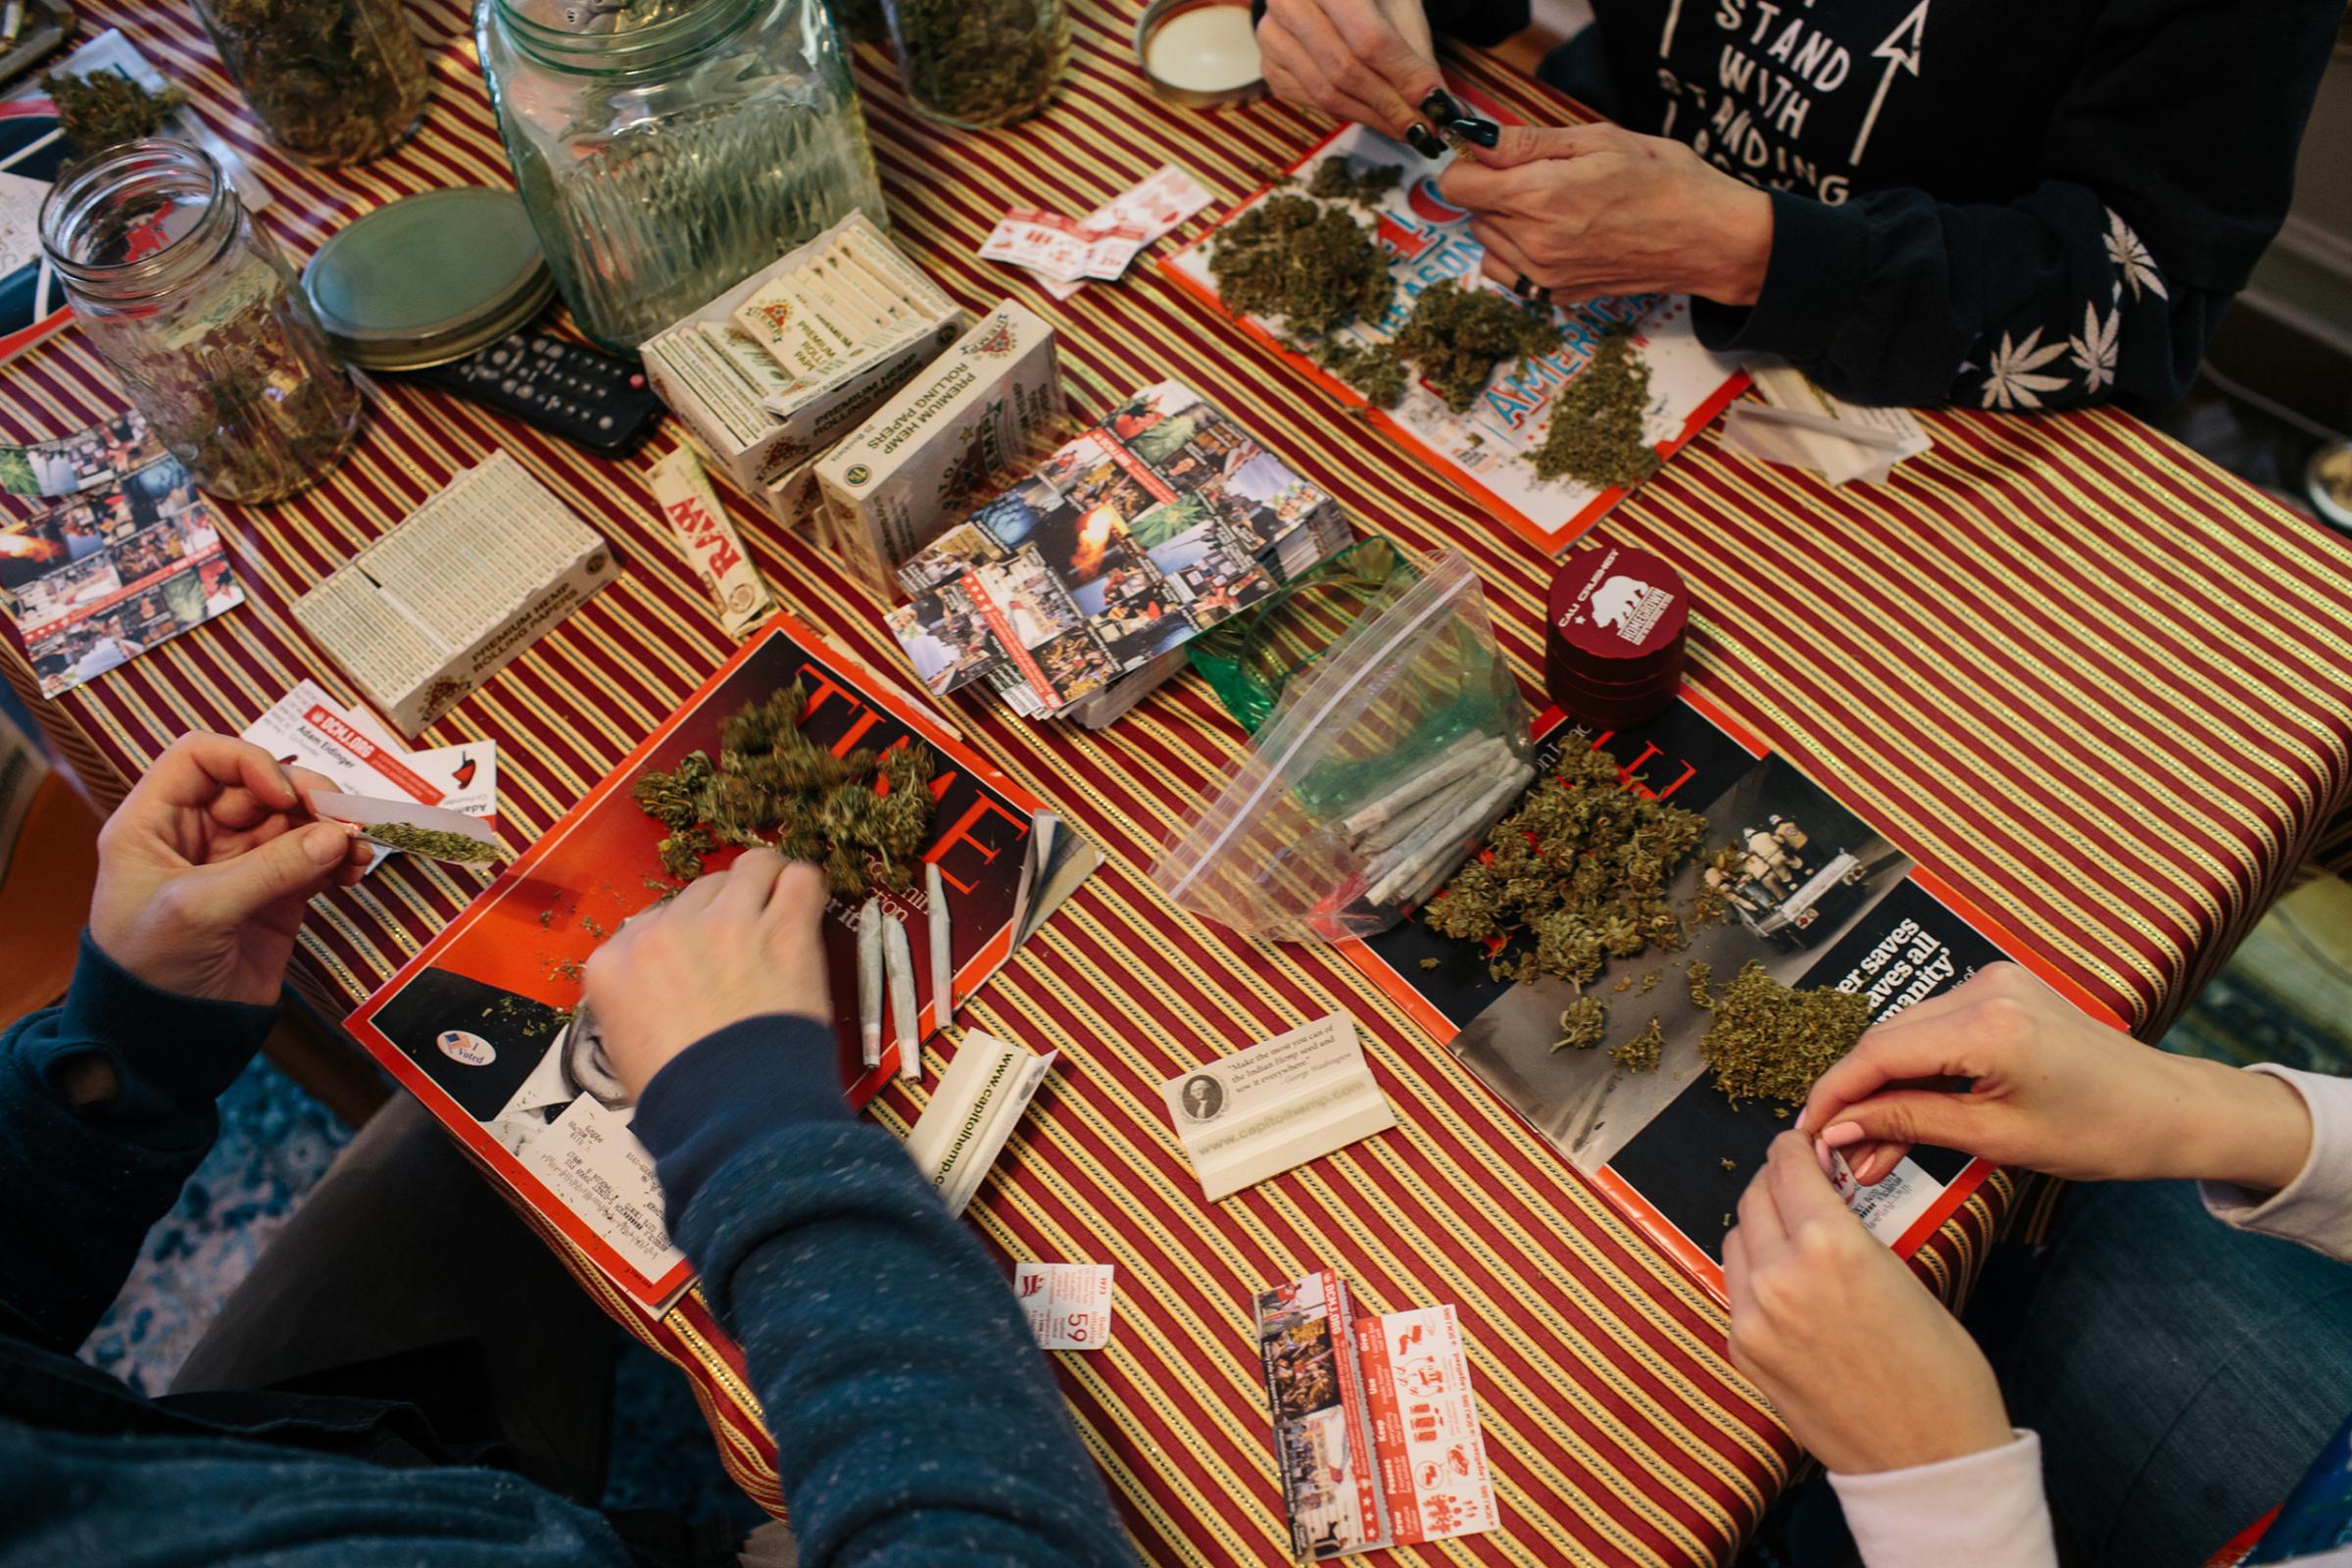 Activists from the cannabis community DCMJ roll joints in a Washington, D.C., home on Jan. 16 in preparation for President-Elect Donald Trump’s inauguration. A cofounder of the group said TIME magazines were used after learning a photographer on assignment for TIME would observe their operations. Other newspapers and magazines, like High Times, have previously been used when the group has been photographed by other media.